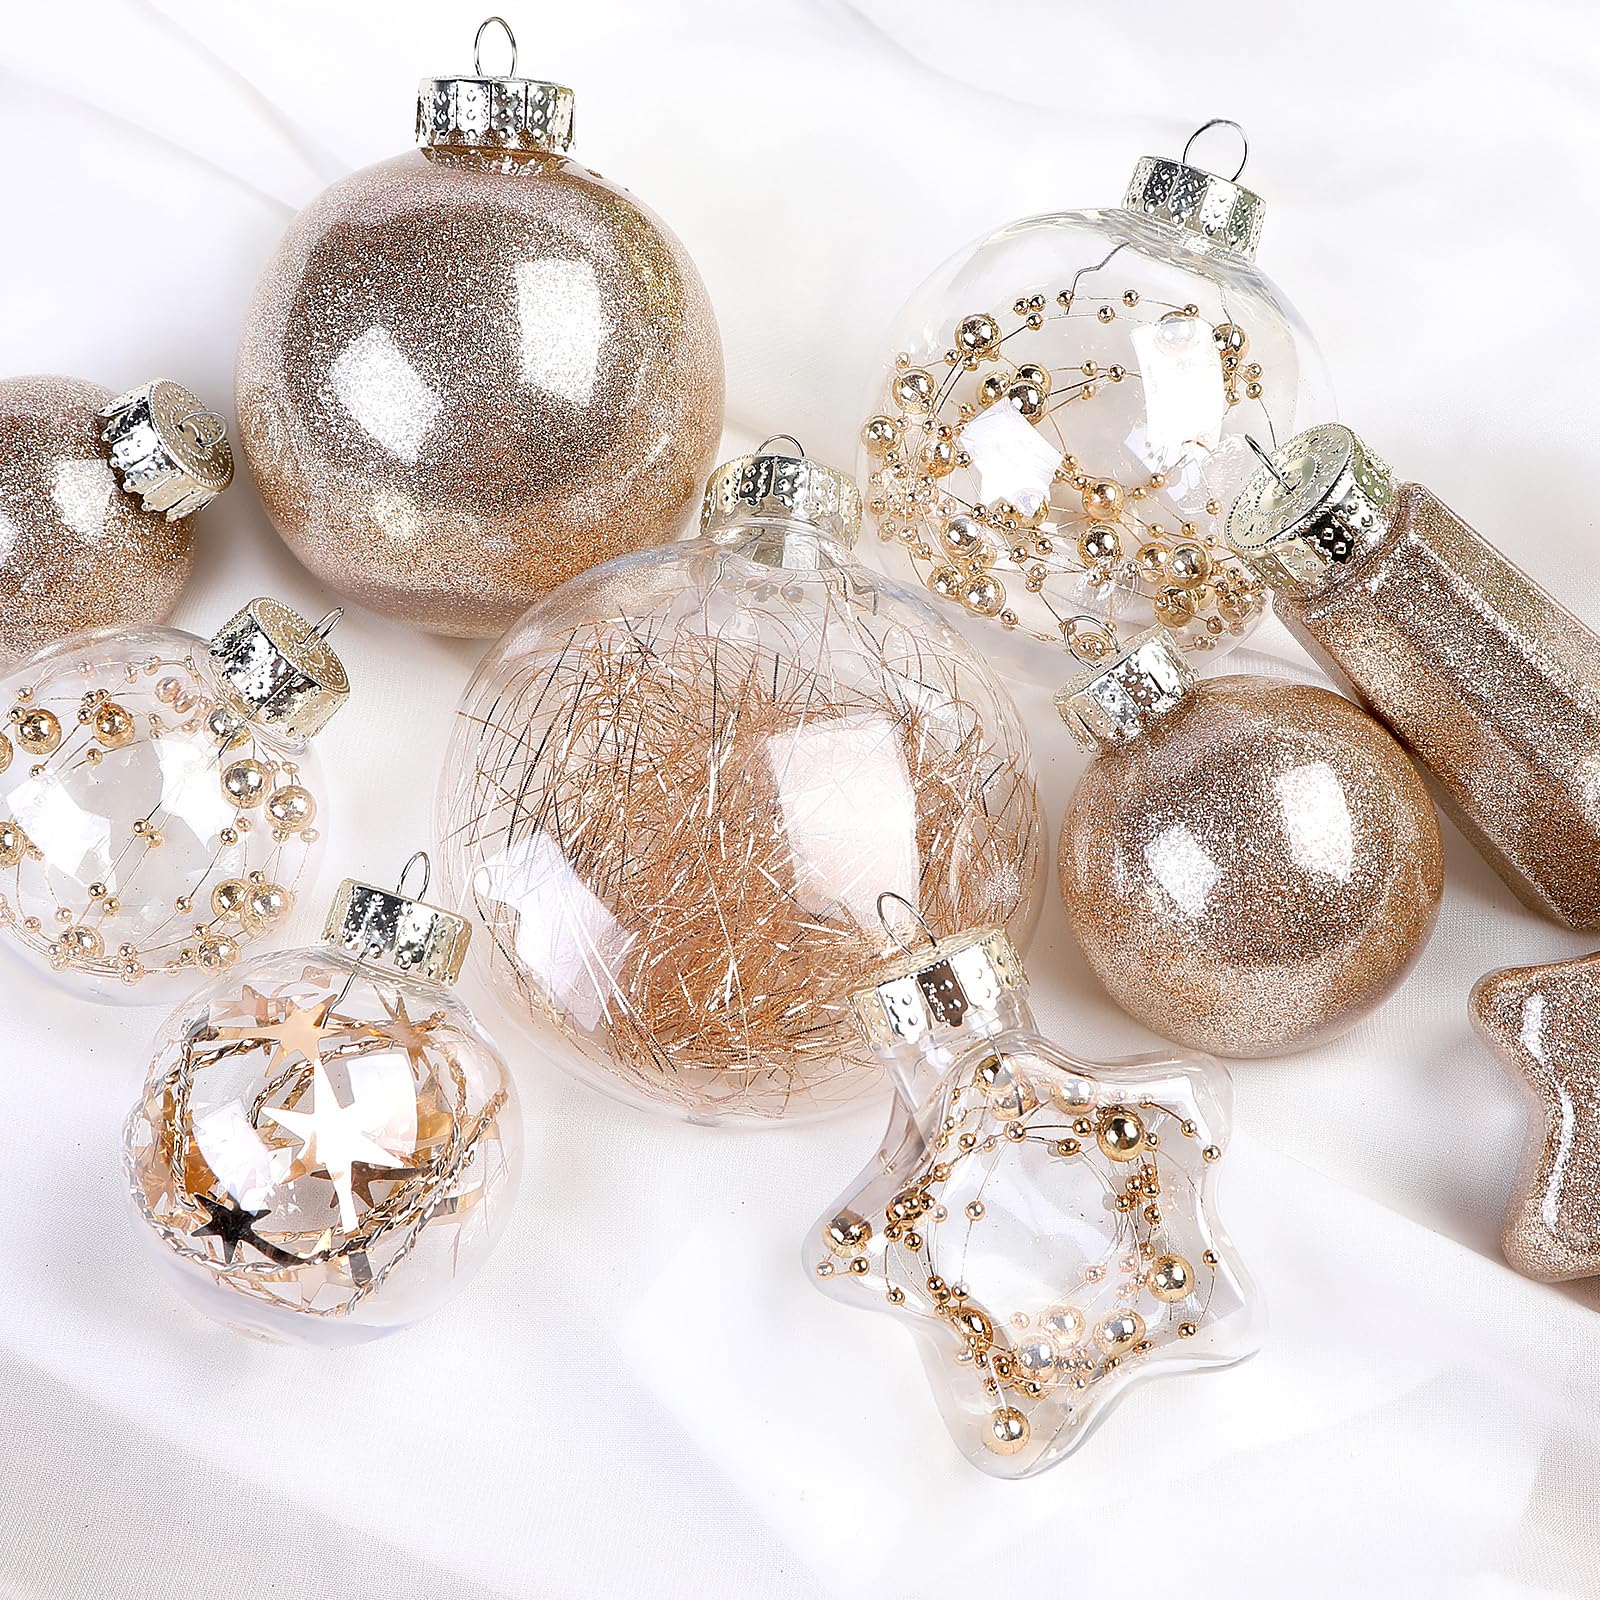 SHareconn 86pcs Shatterproof Plastic Christmas Ball Ornaments, Decorative Hanging Baubles for Xmas Tree/Holiday/Party - Champagne